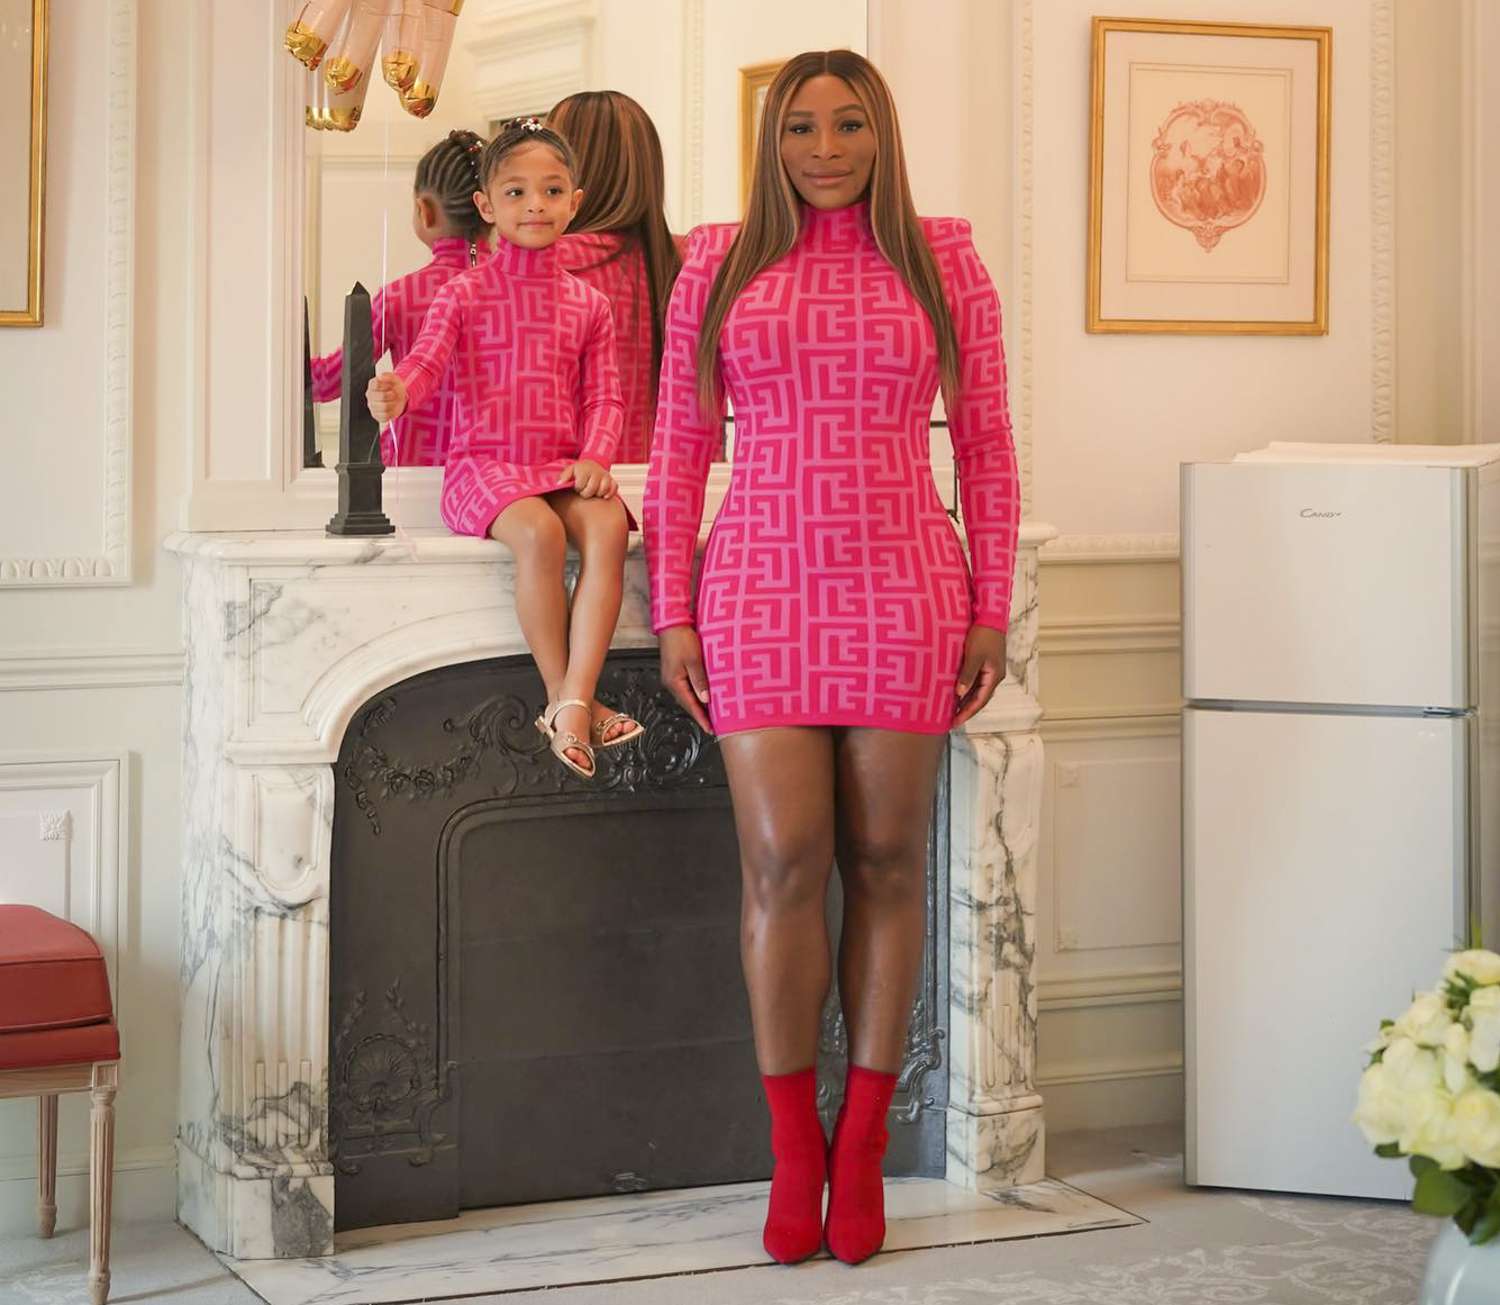 Serena Williams and her daughter Alexis